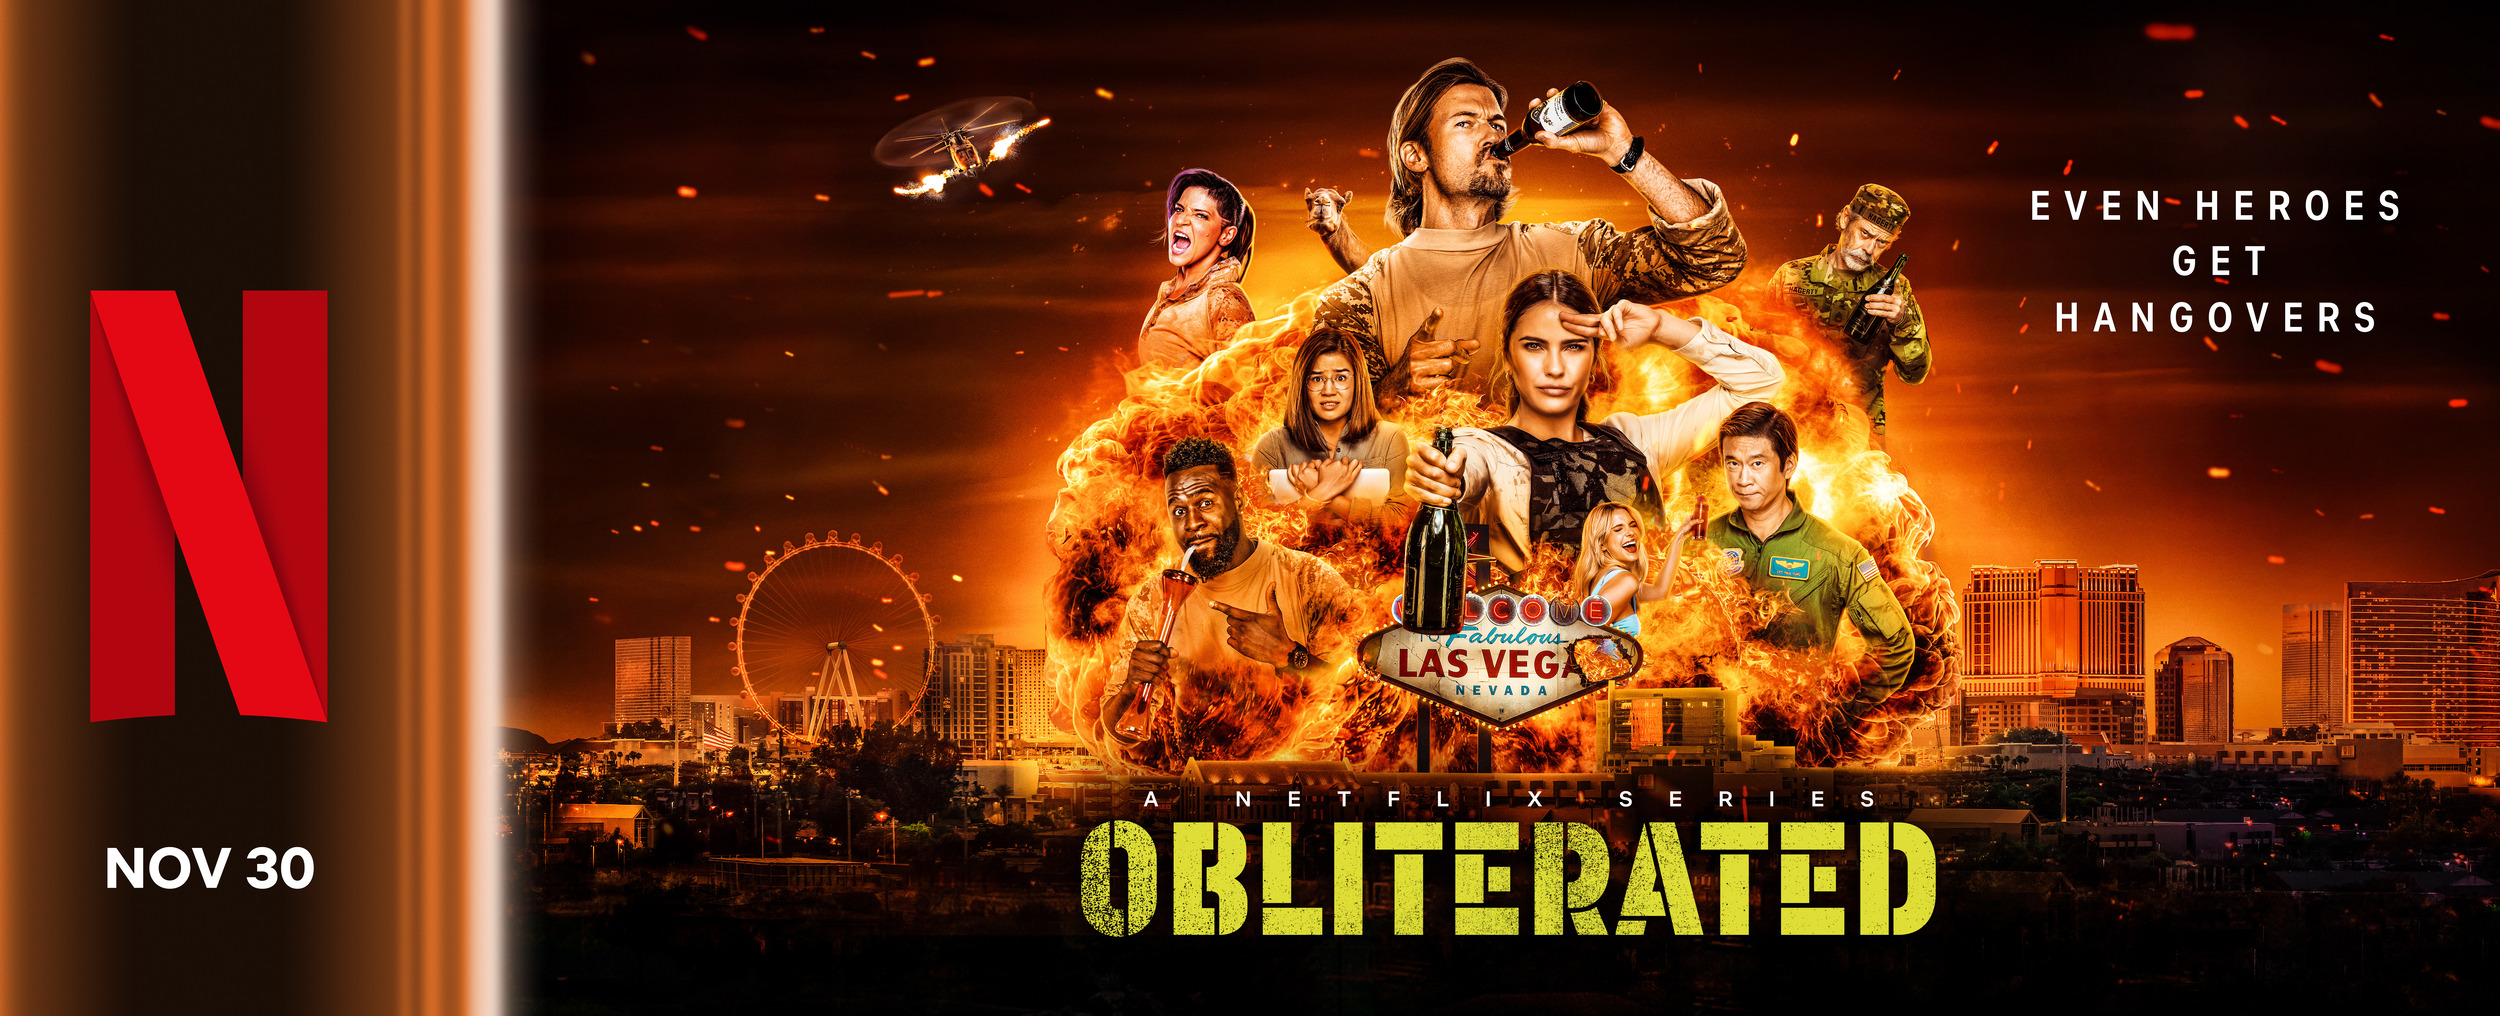 Mega Sized TV Poster Image for Obliterated (#3 of 11)